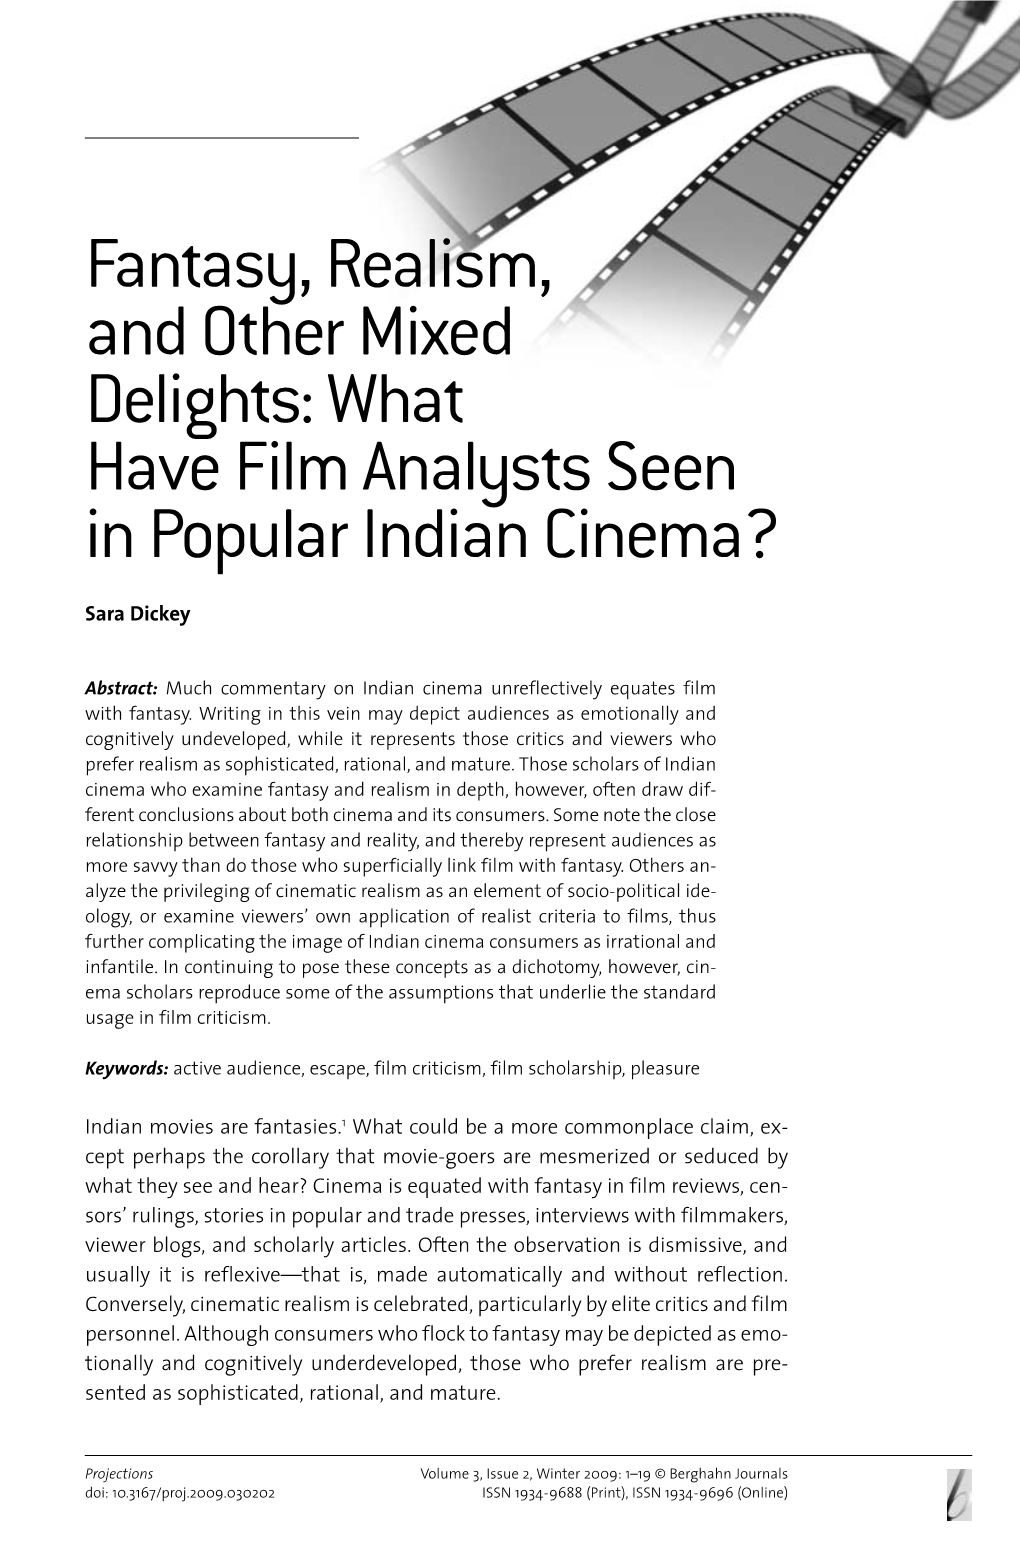 “Fantasy” and “Realism” in Indian Cinema Writing